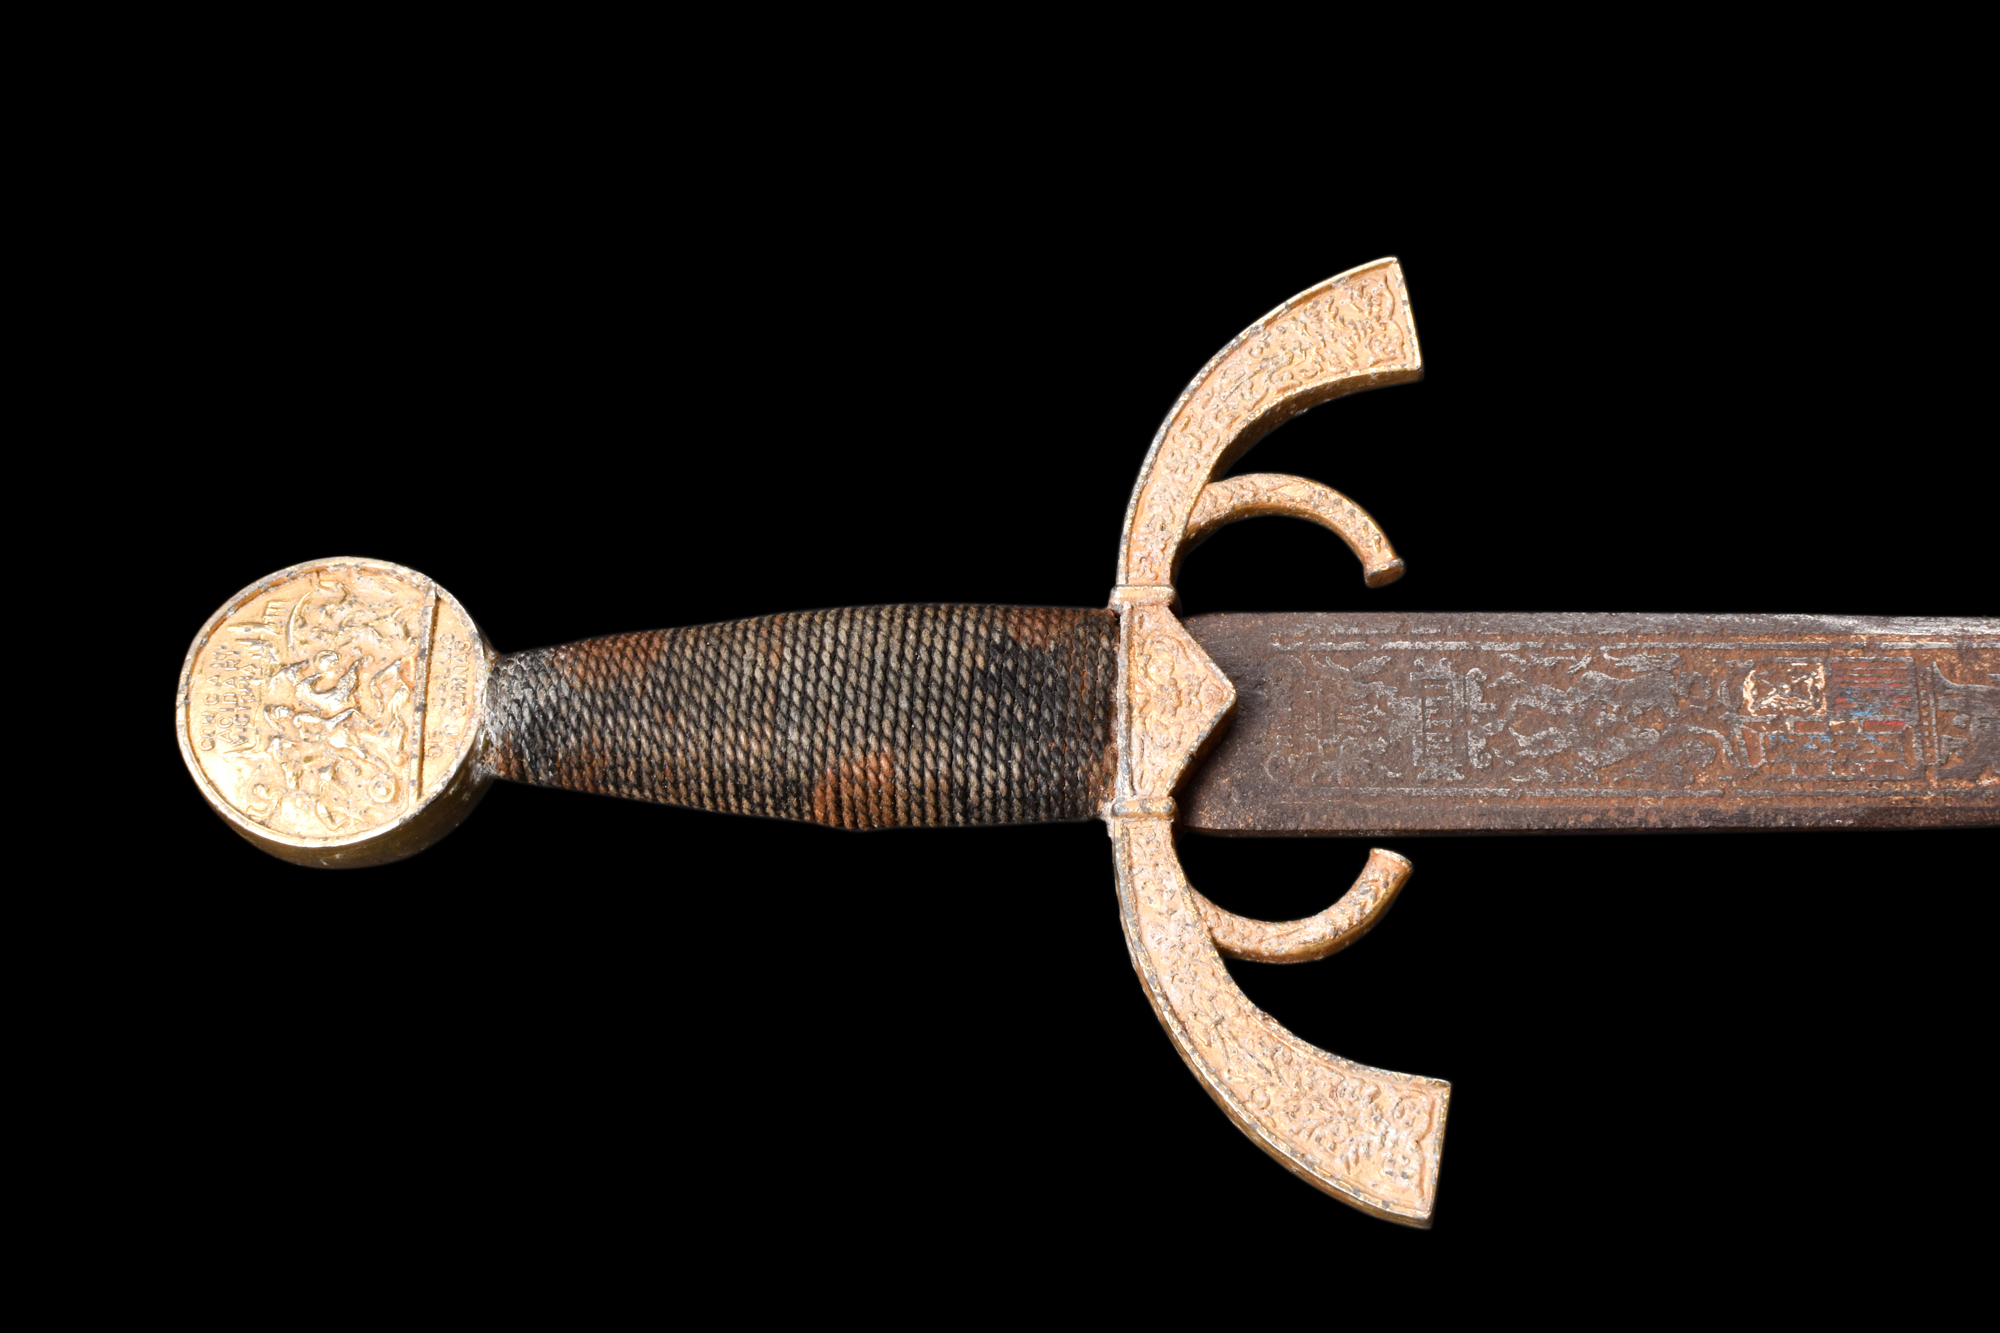 A SWORD IN 15TH CENTURY STYLE - Image 5 of 9